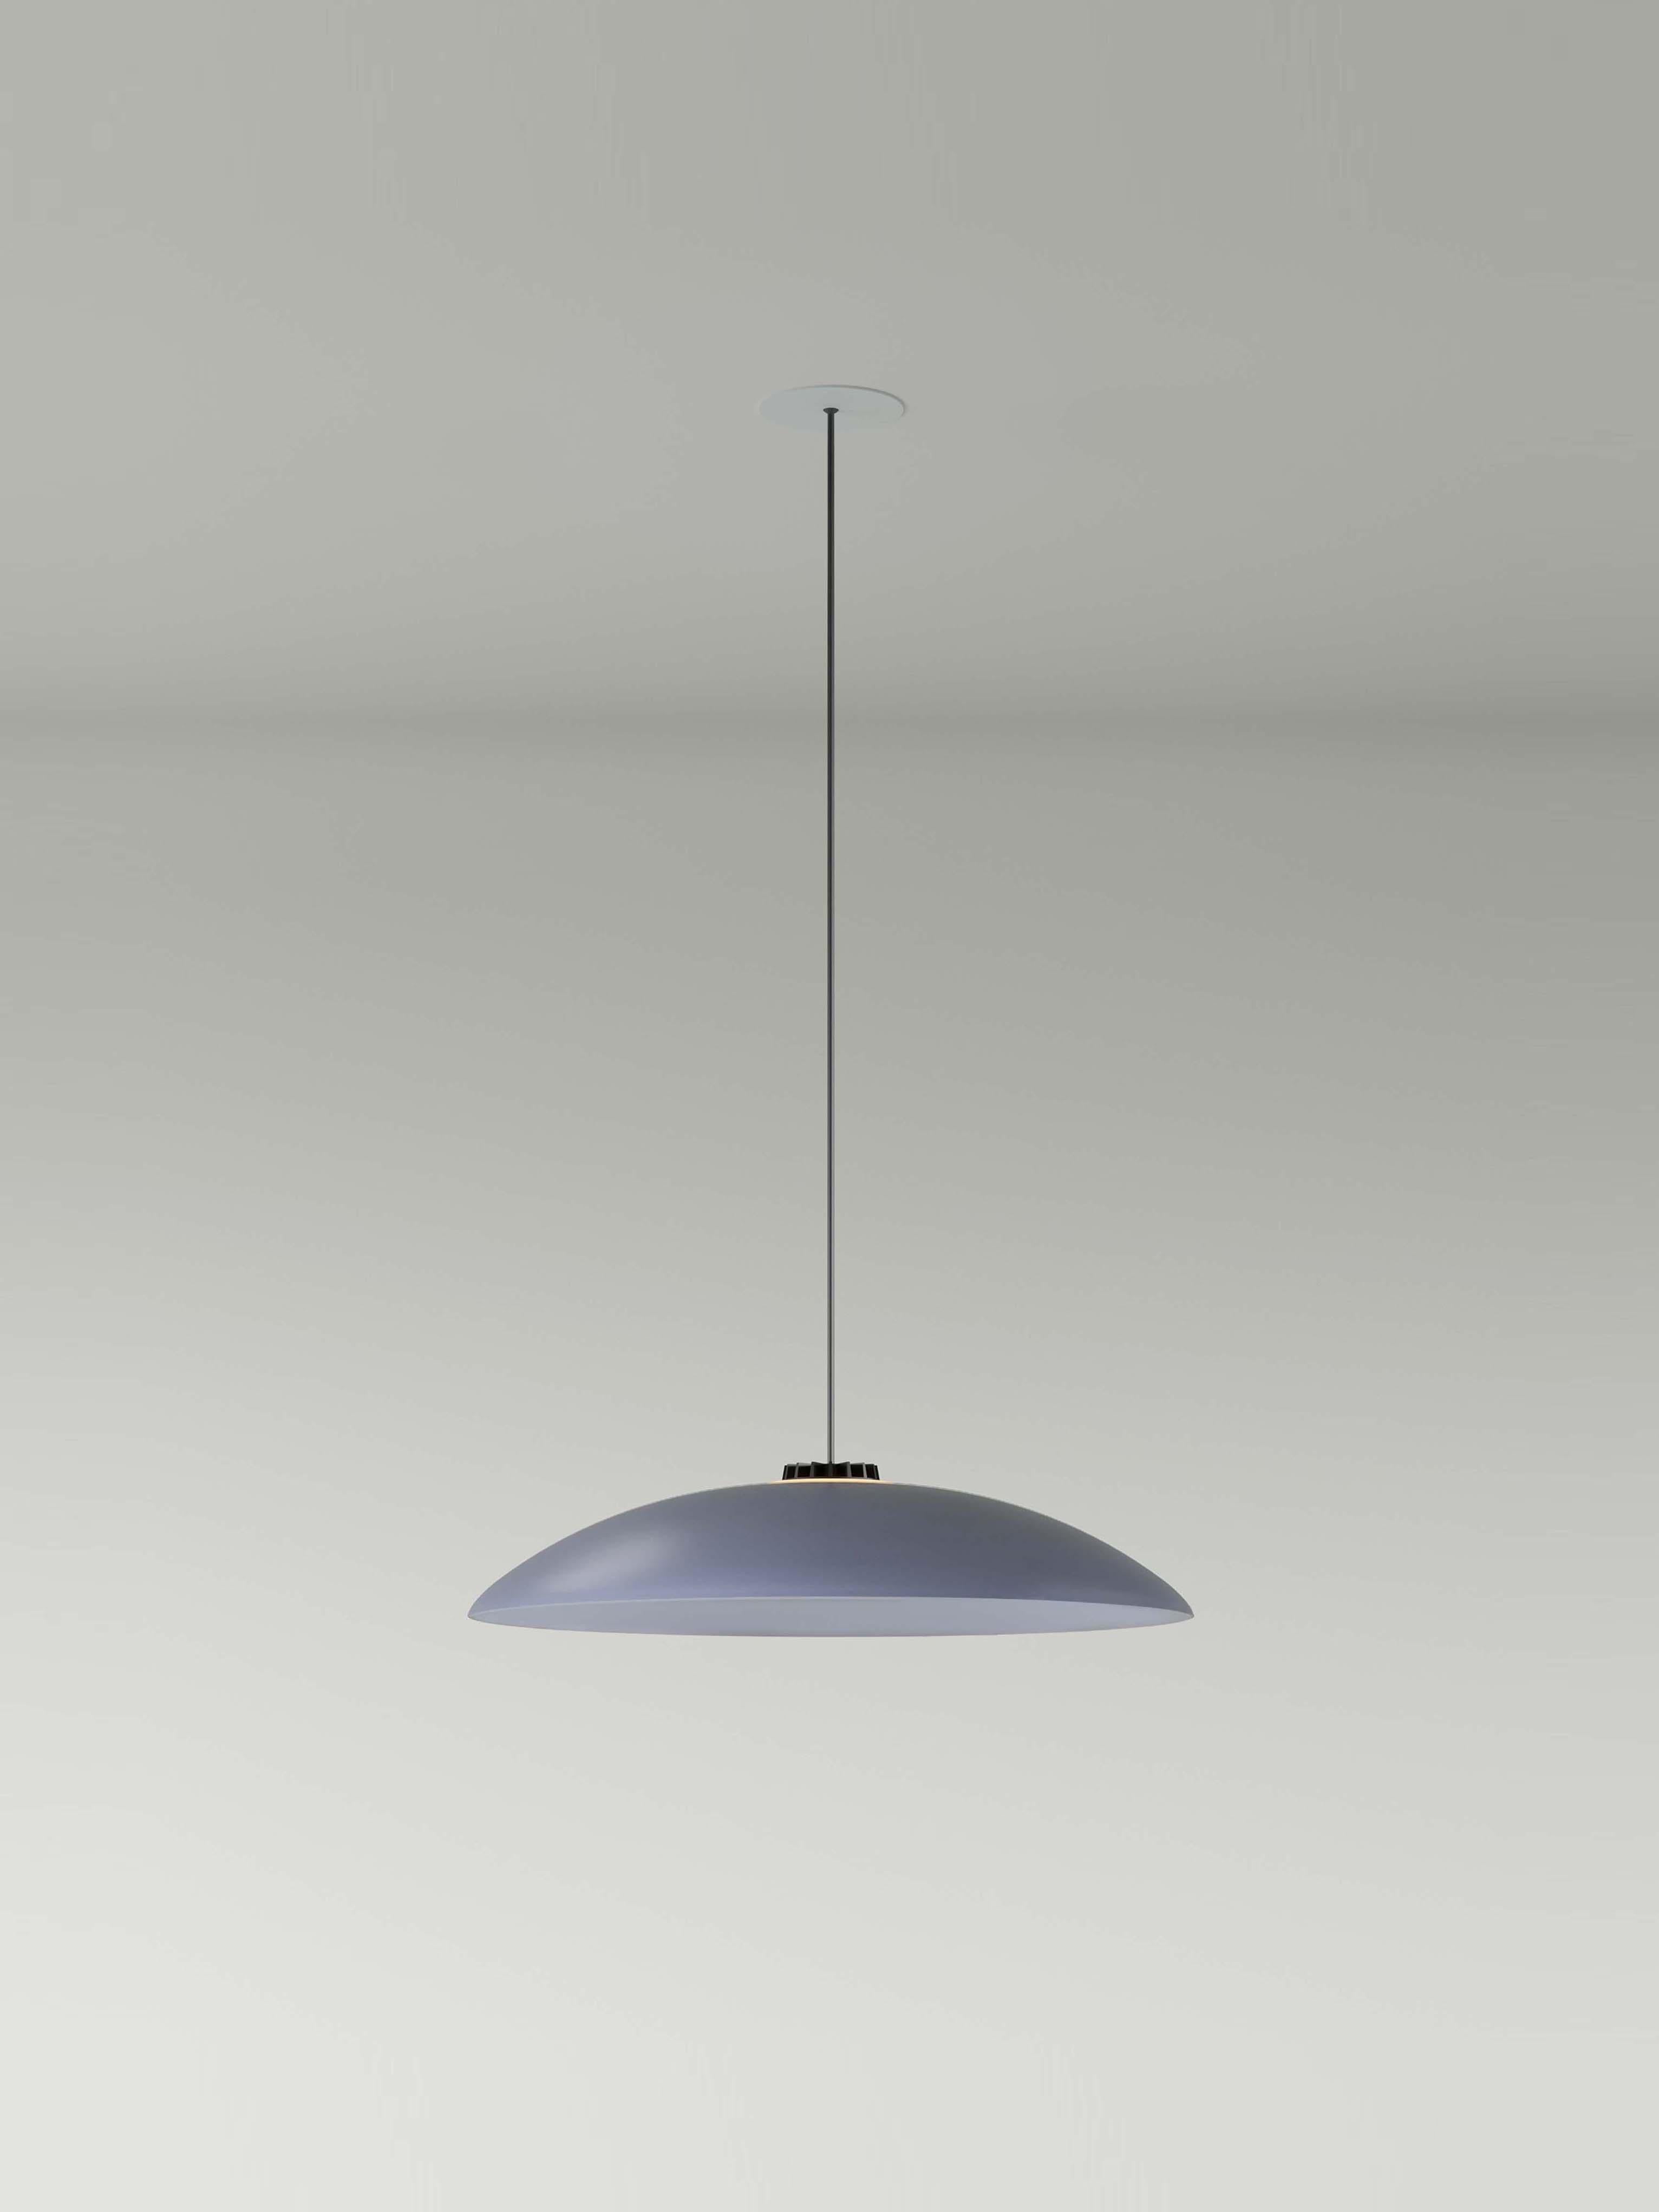 Medium Blue HeadHat Plate pendant lamp by Santa & Cole
Dimensions: D 50 x H 10 cm
Materials: Metal.
Cable lenght: 3mts.
Available in other colors and sizes. Available in 2 cable lengths: 3mts, 8mts.
Availalble in 2 canopy colors: black or